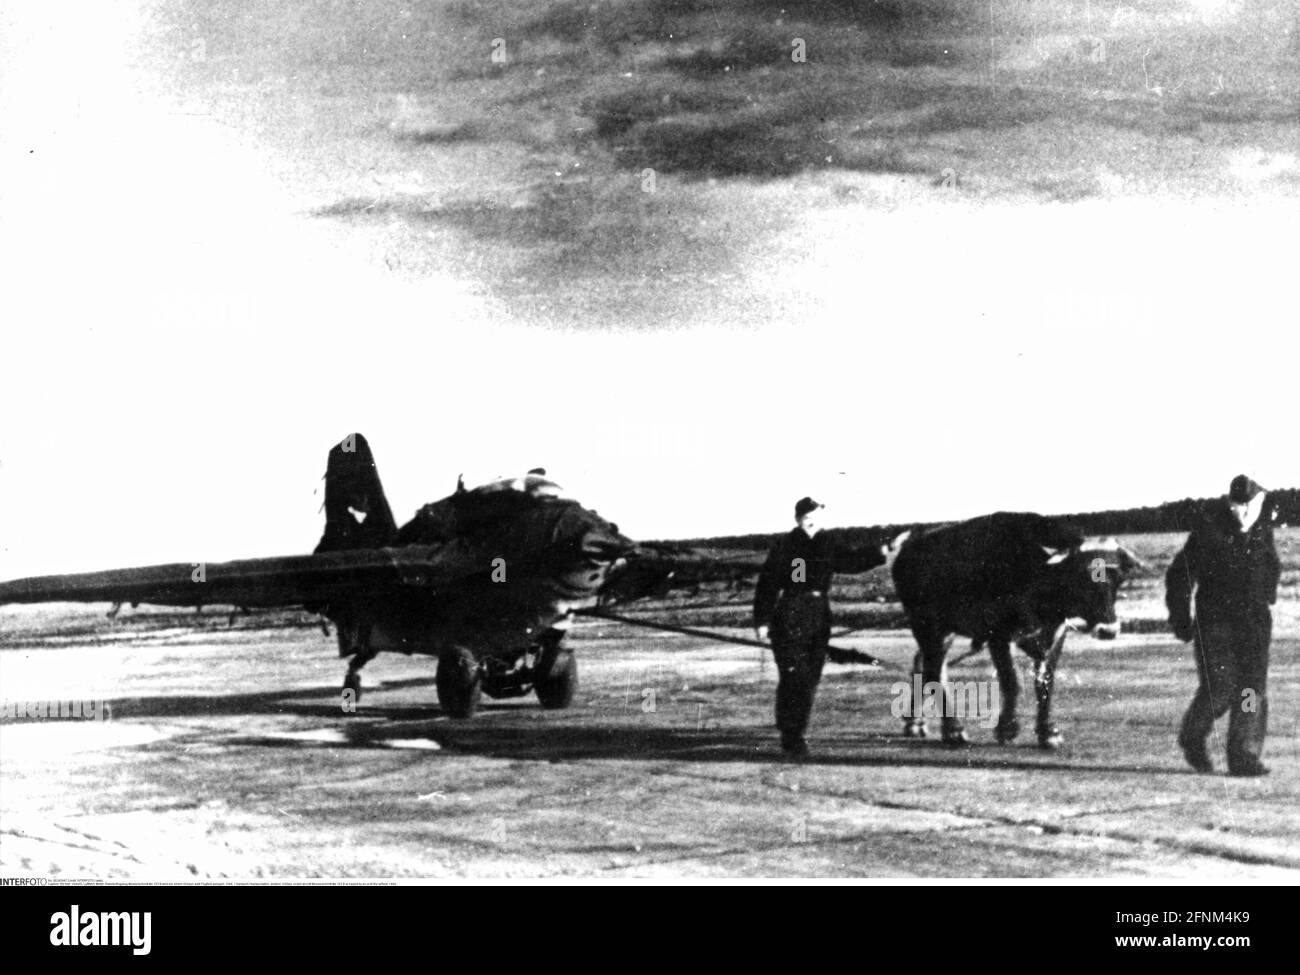 transport / transportation, aviation, military, rocket aircraft Messerschmitt Me 163 B is hauled by an ox th the airfield, 1944, EDITORIAL-USE-ONLY Stock Photo